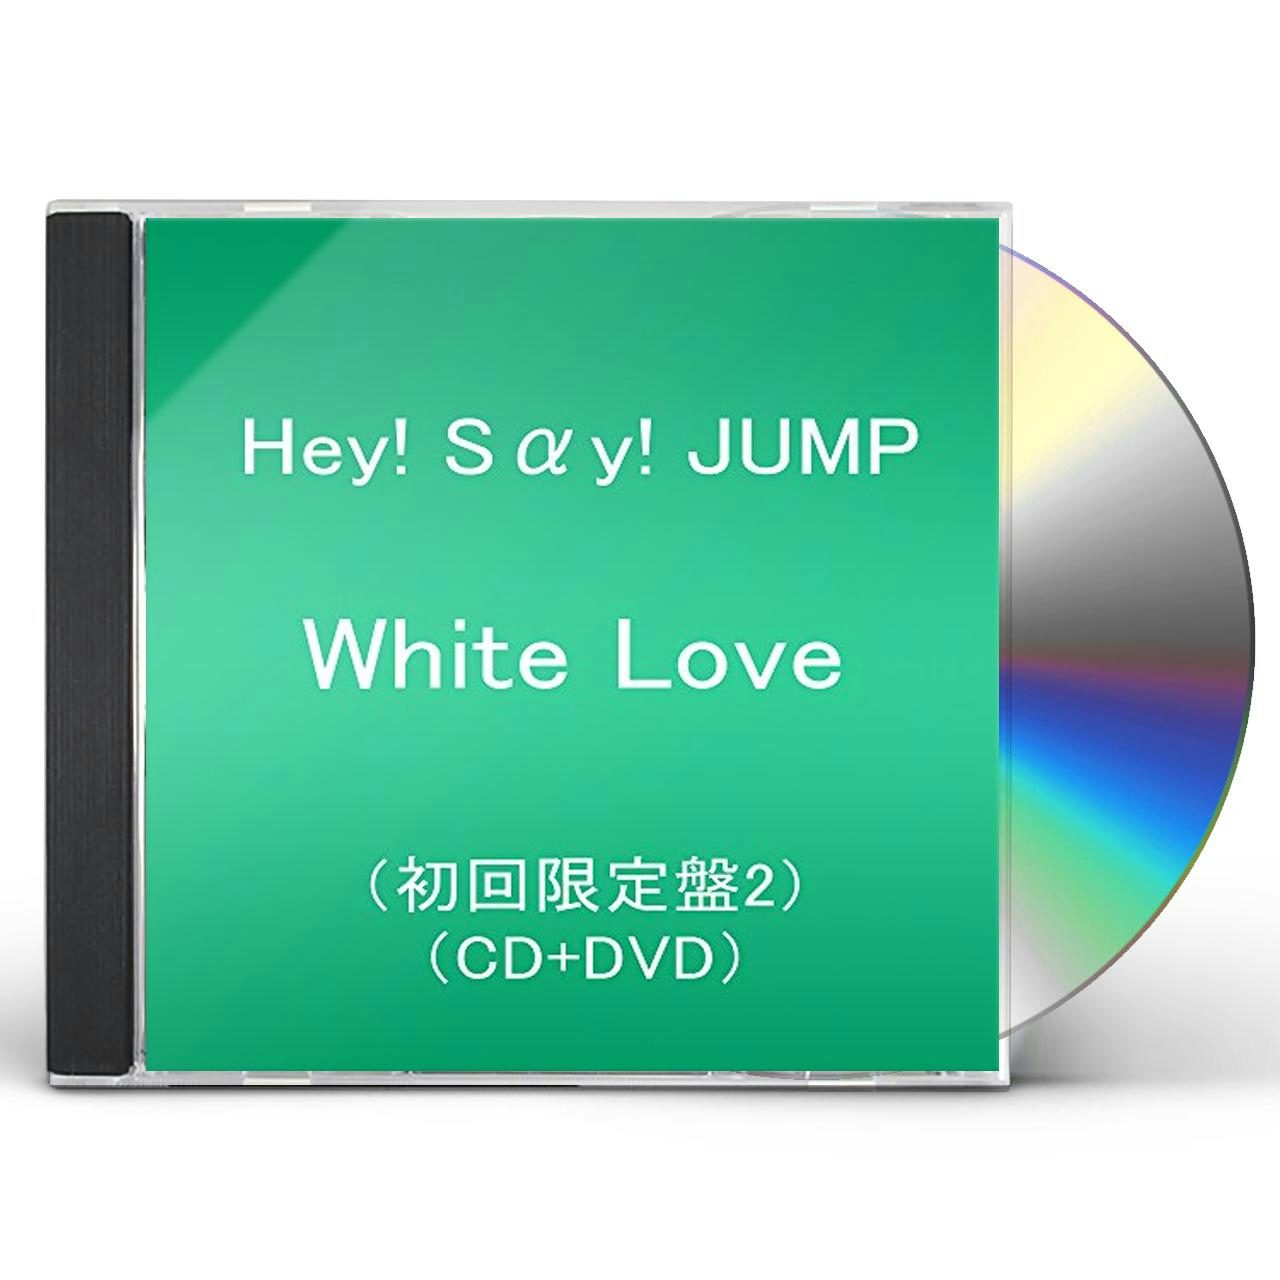 Hey! Say! Jump WHITE LOVE: LIMITED-2 CD